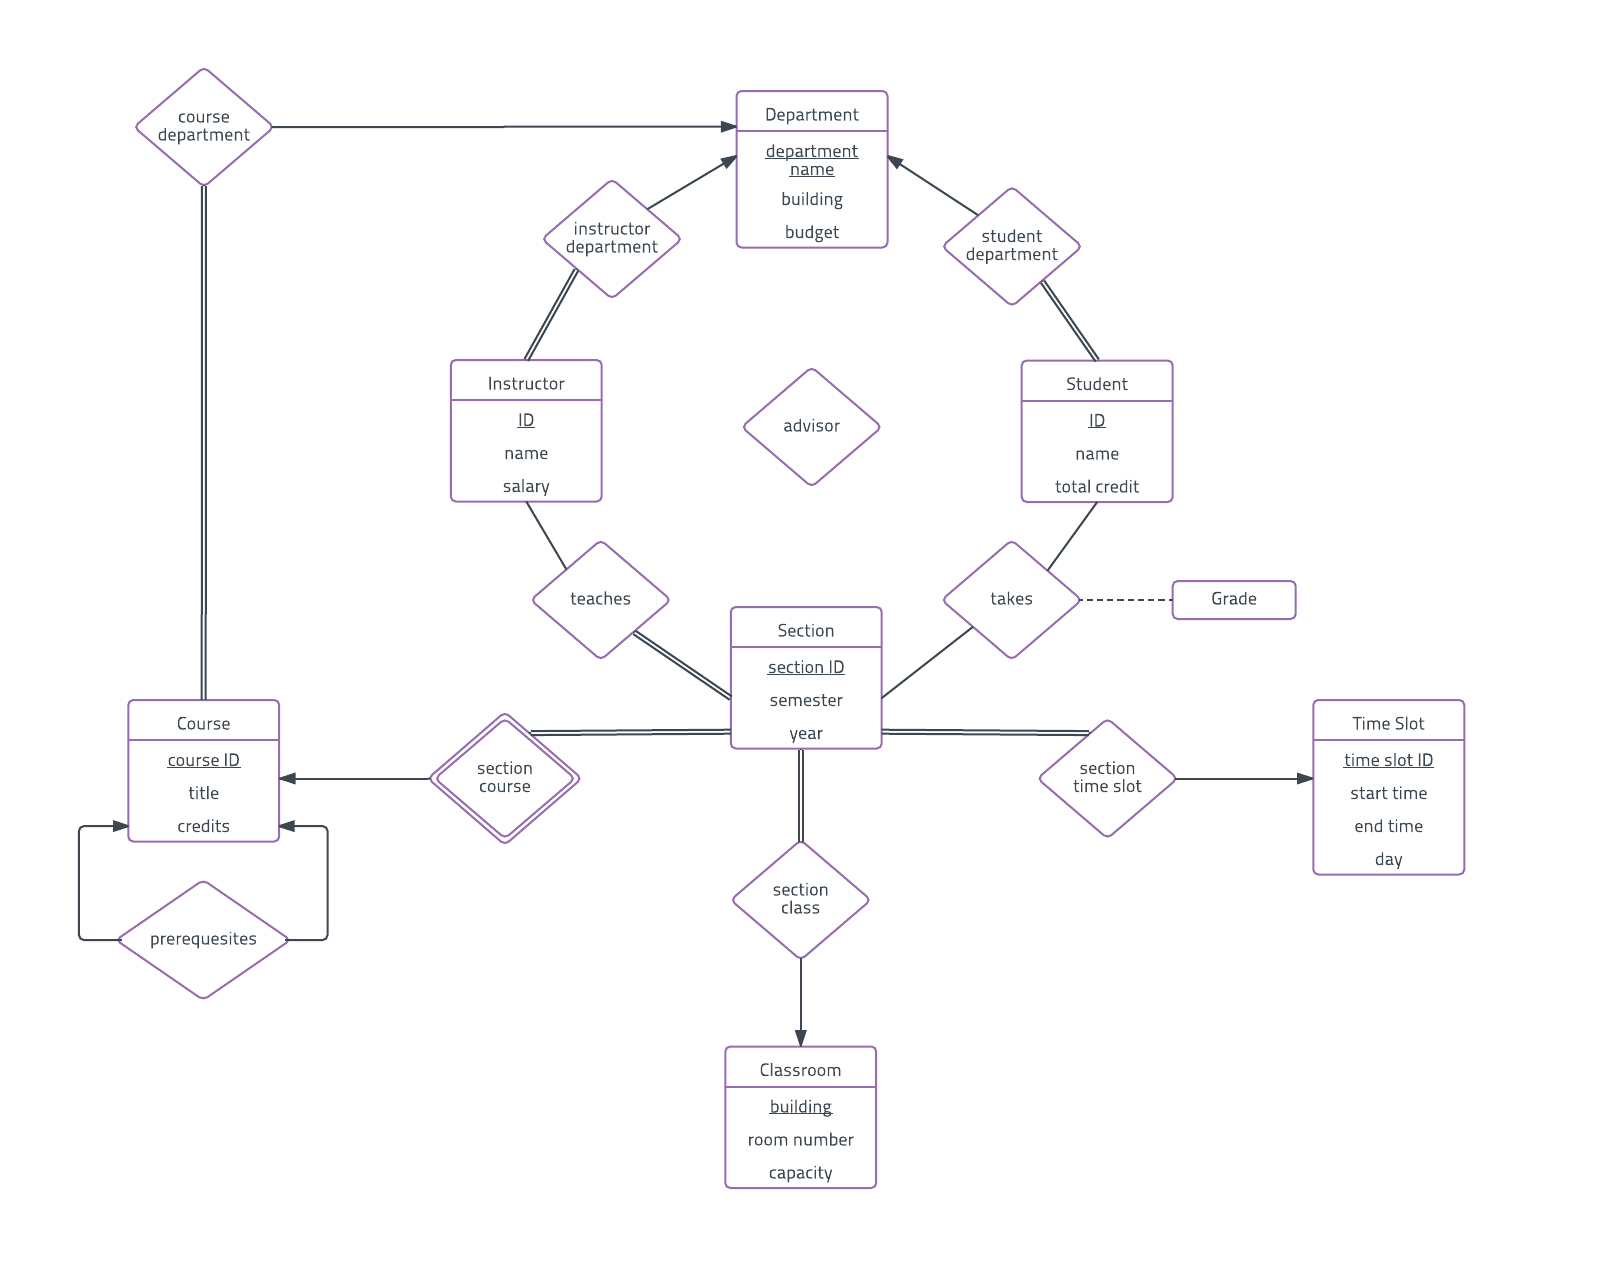 Er Diagram Examples And Templates | Lucidchart intended for How To Draw Er Diagram In Dbms